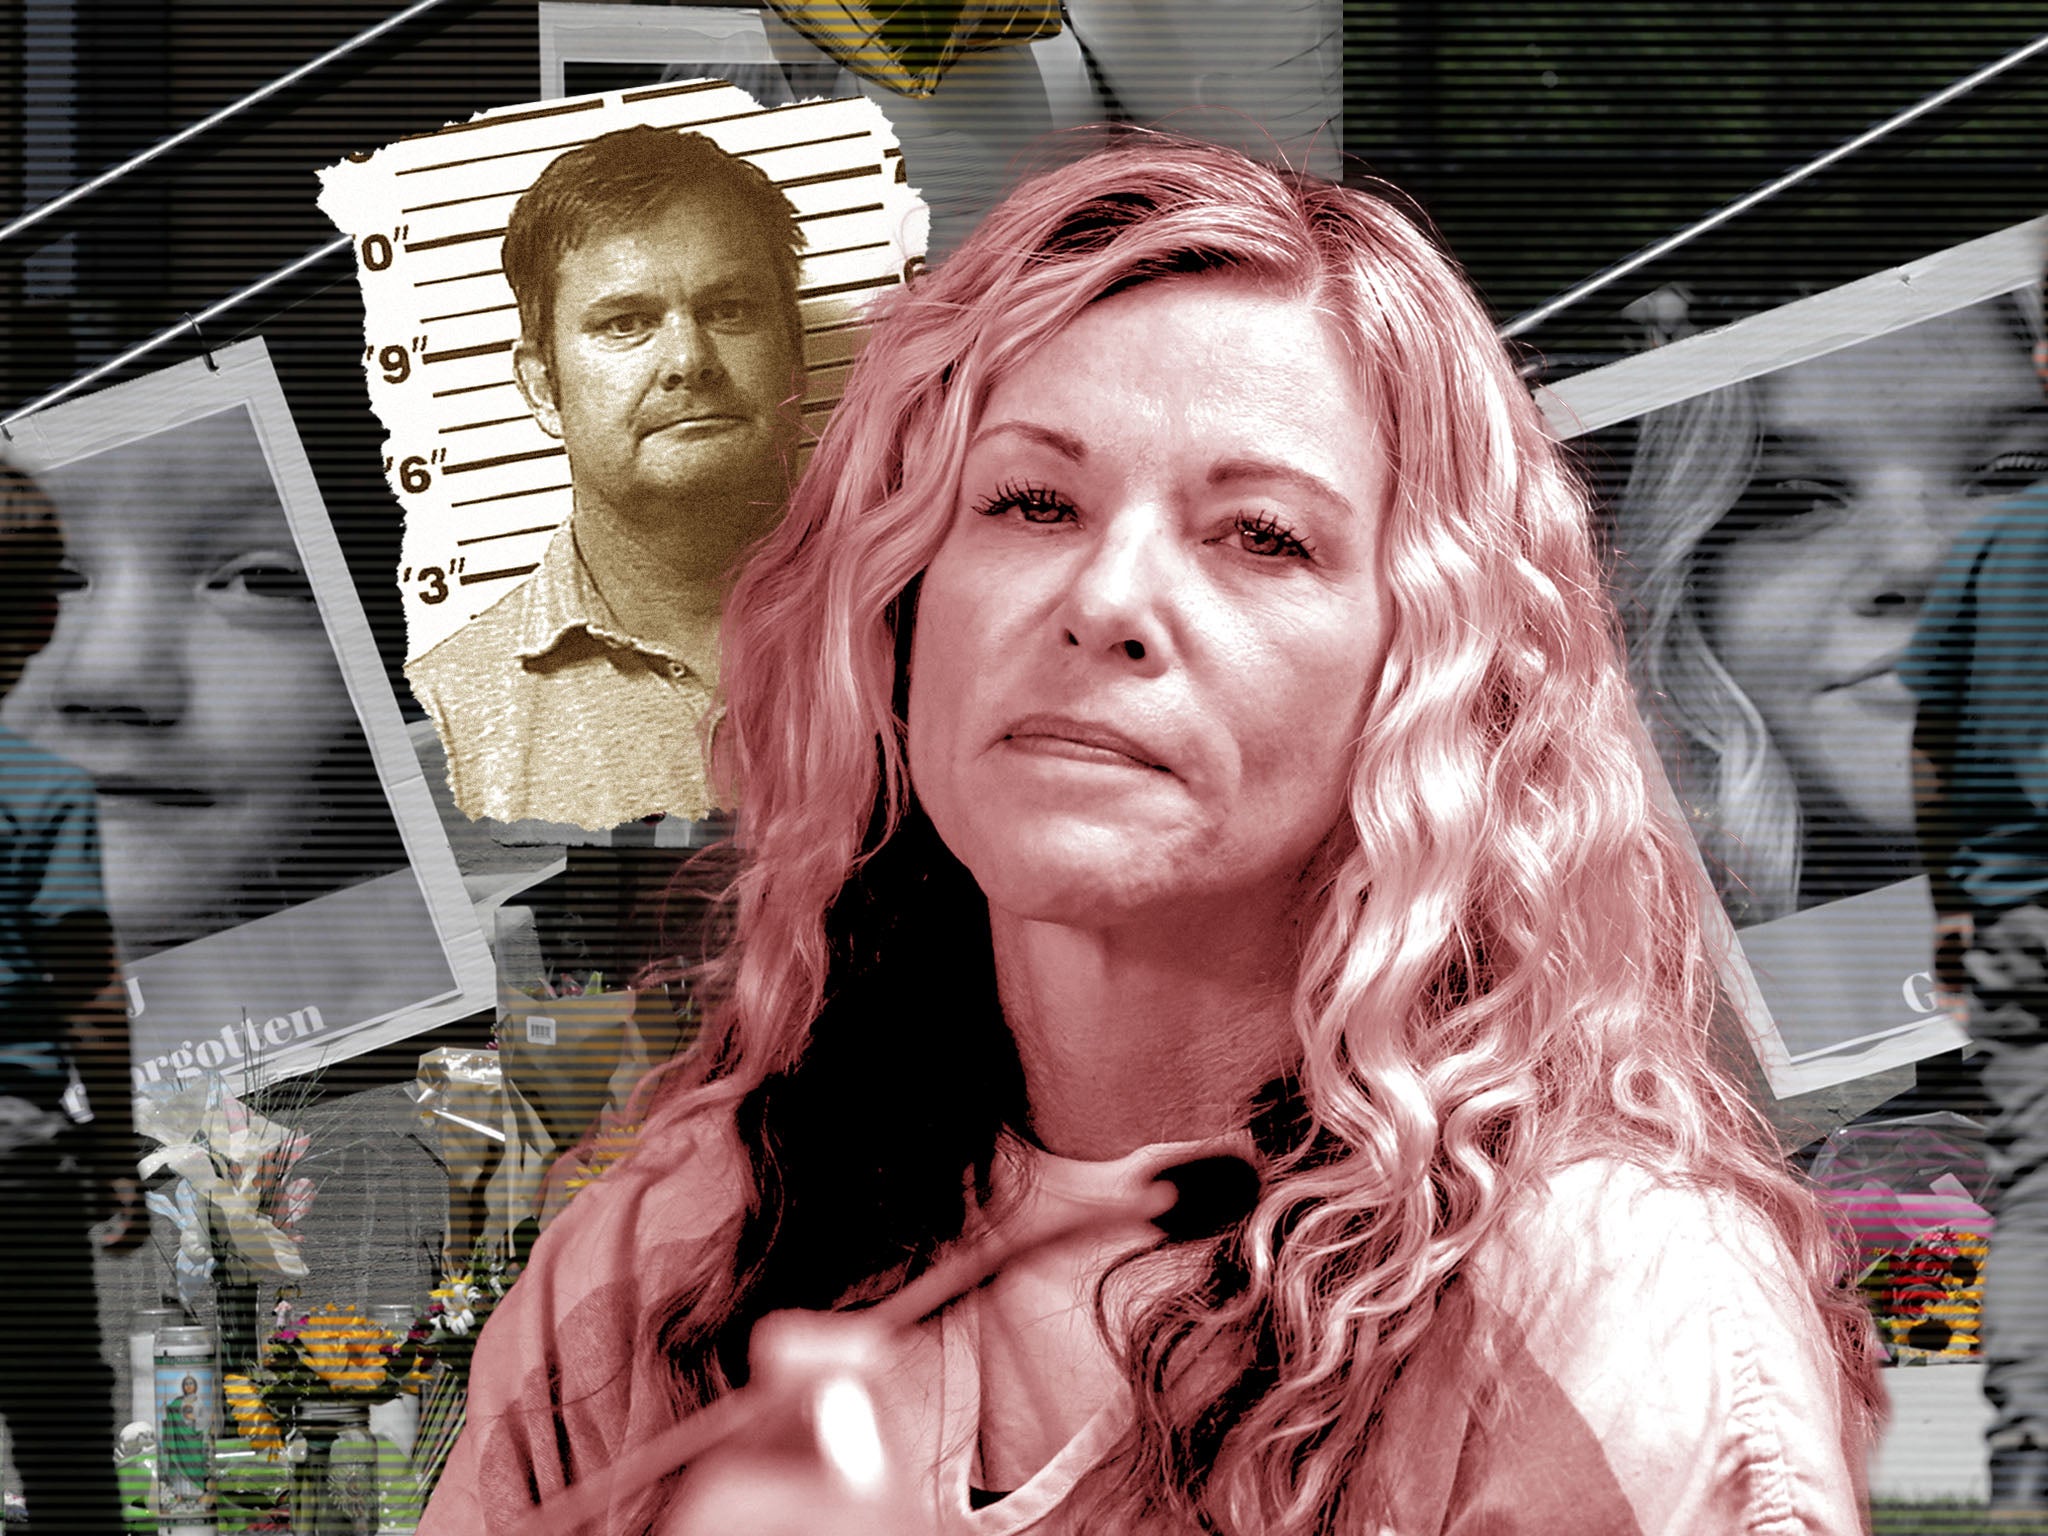 Lori Vallow is at the centre of a bizarre case involving cults and multiple deaths